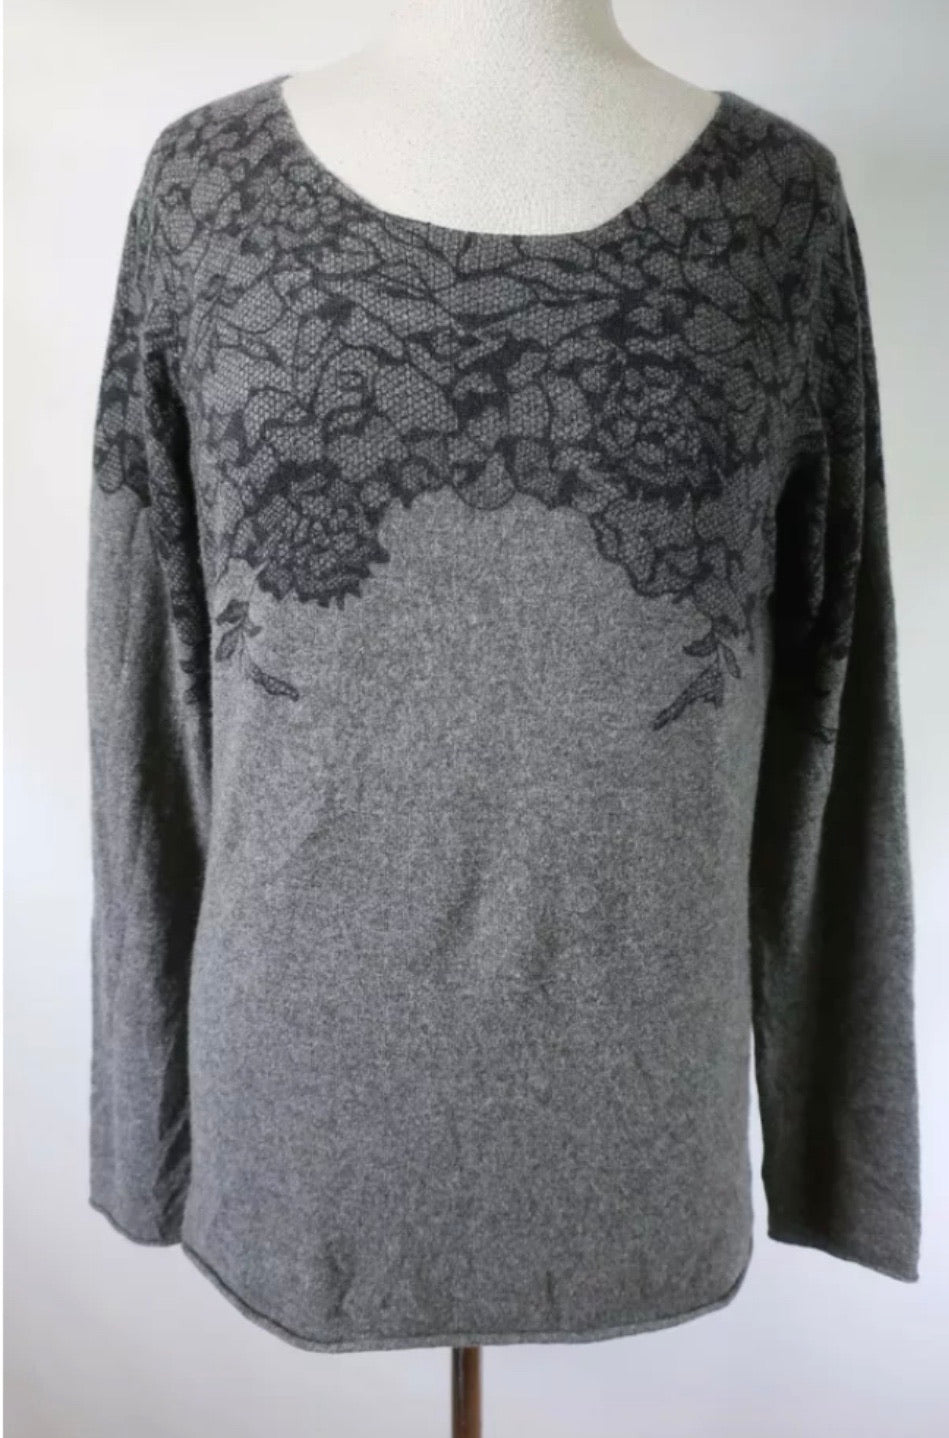 Neiman Marcus NY grey Lacey print cashmere